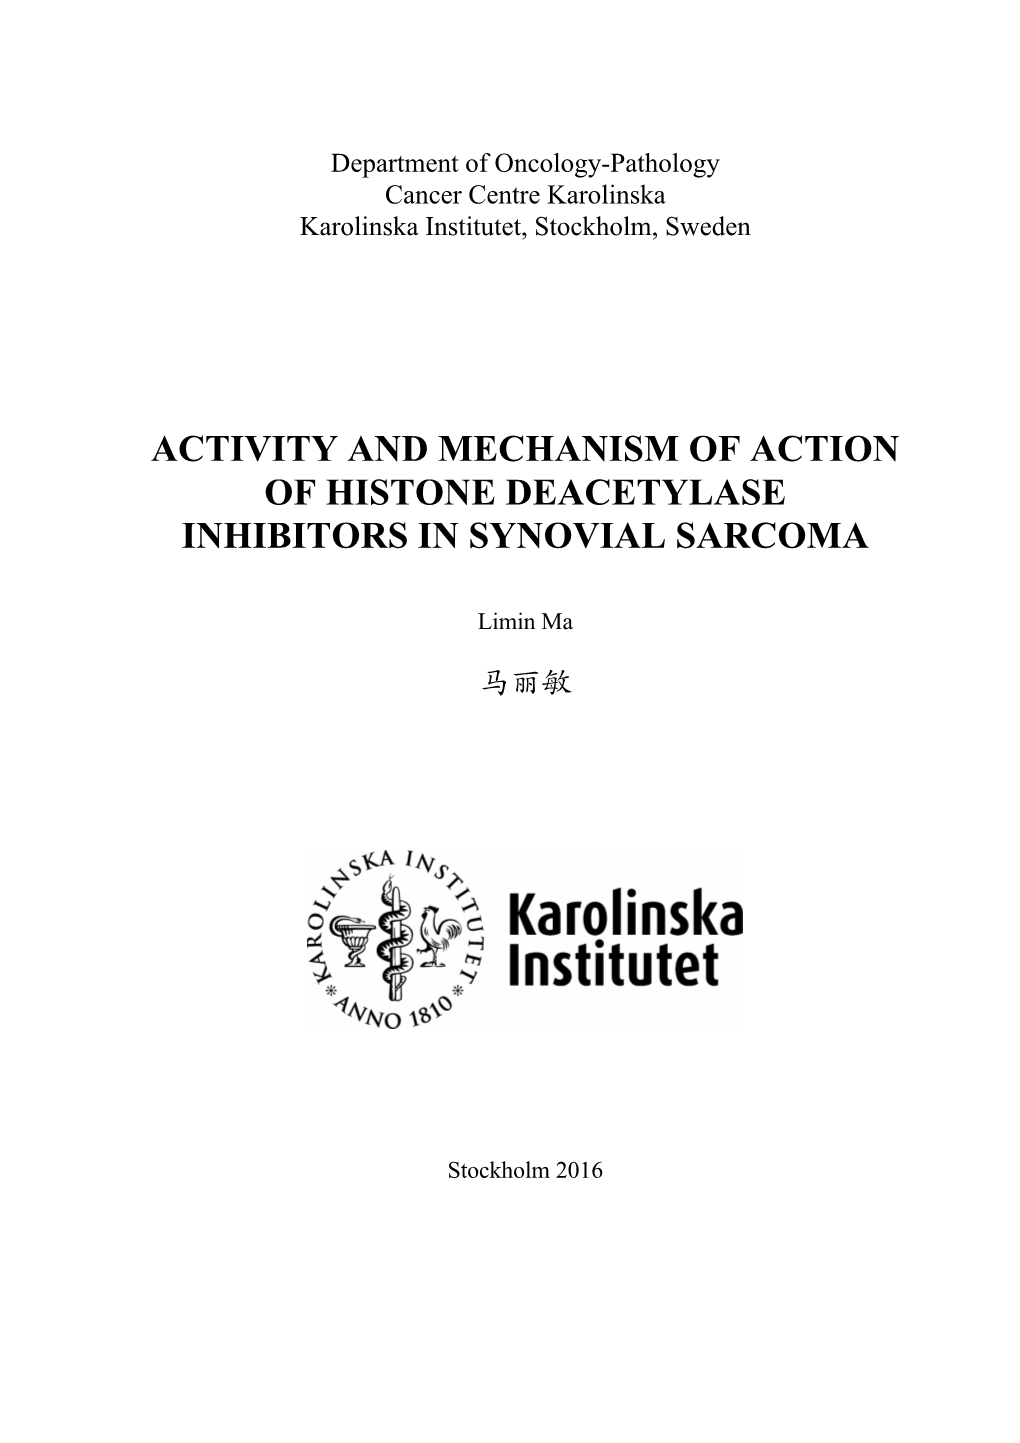 Activity and Mechanism of Action of Histone Deacetylase Inhibitors in Synovial Sarcoma